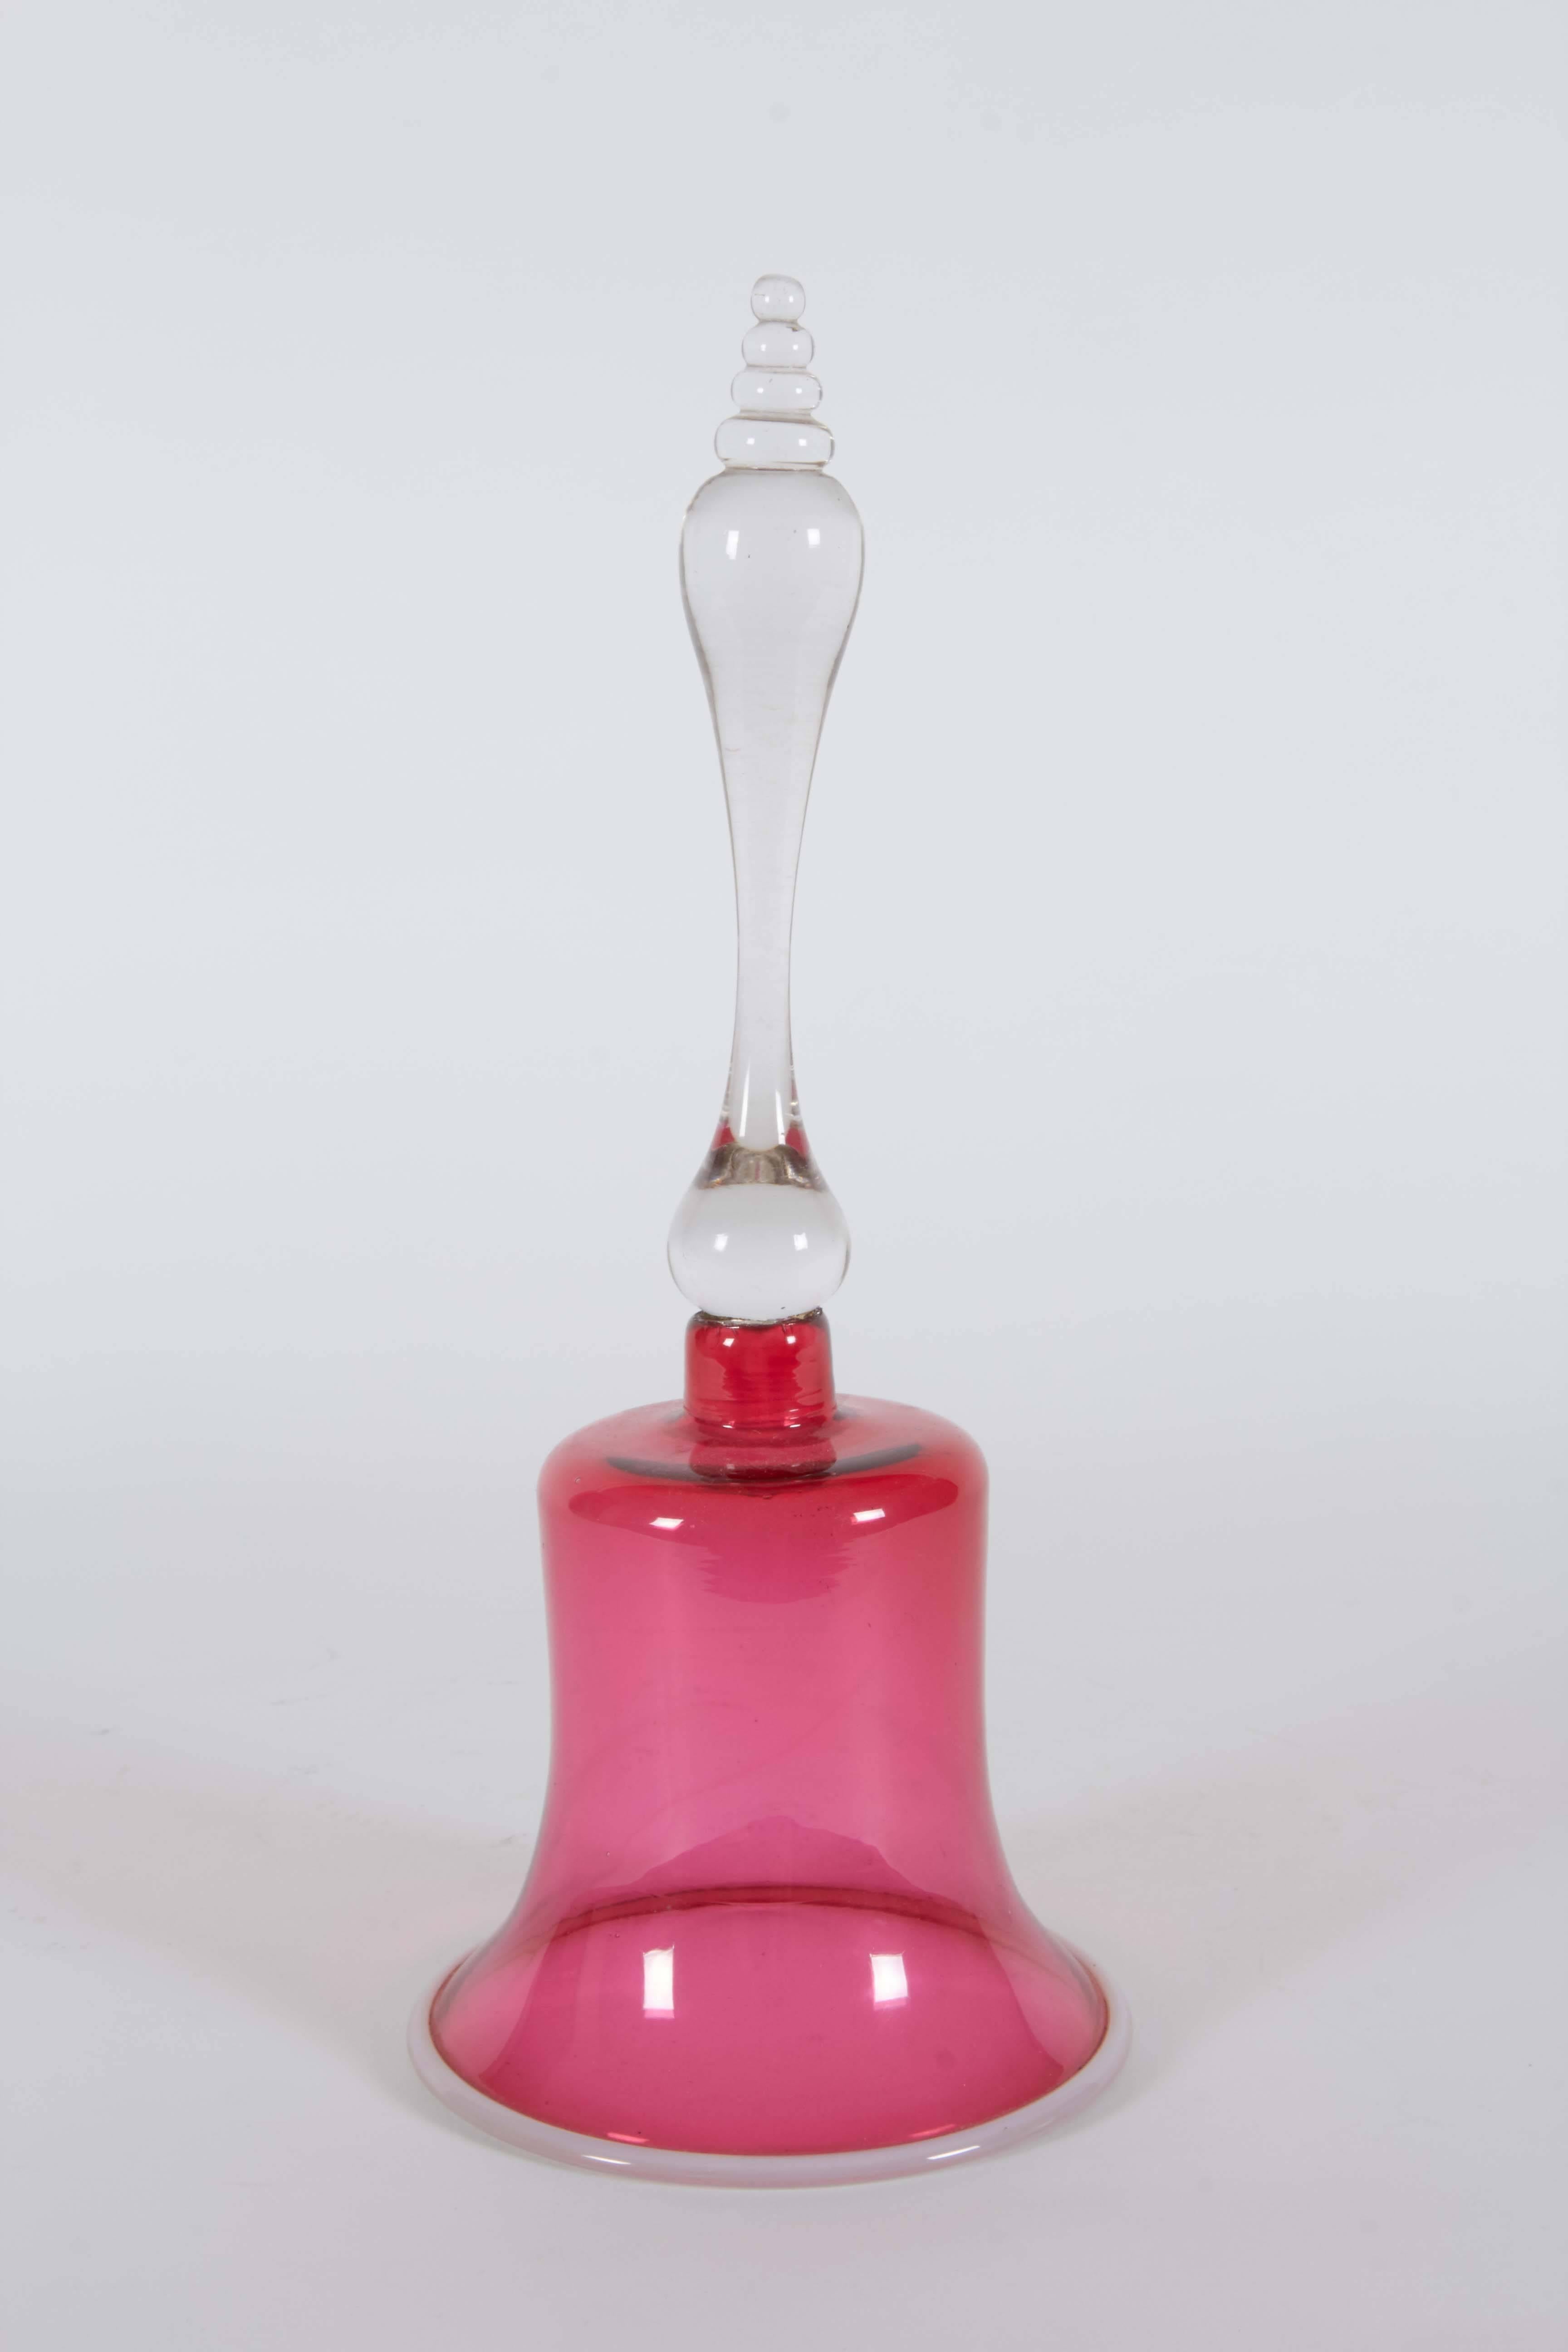 This beautiful glass bell is from the 1880s in England. The glass is finely crafted with subtle details. The cranberry color adds a touch of color into any living or entertaining space.